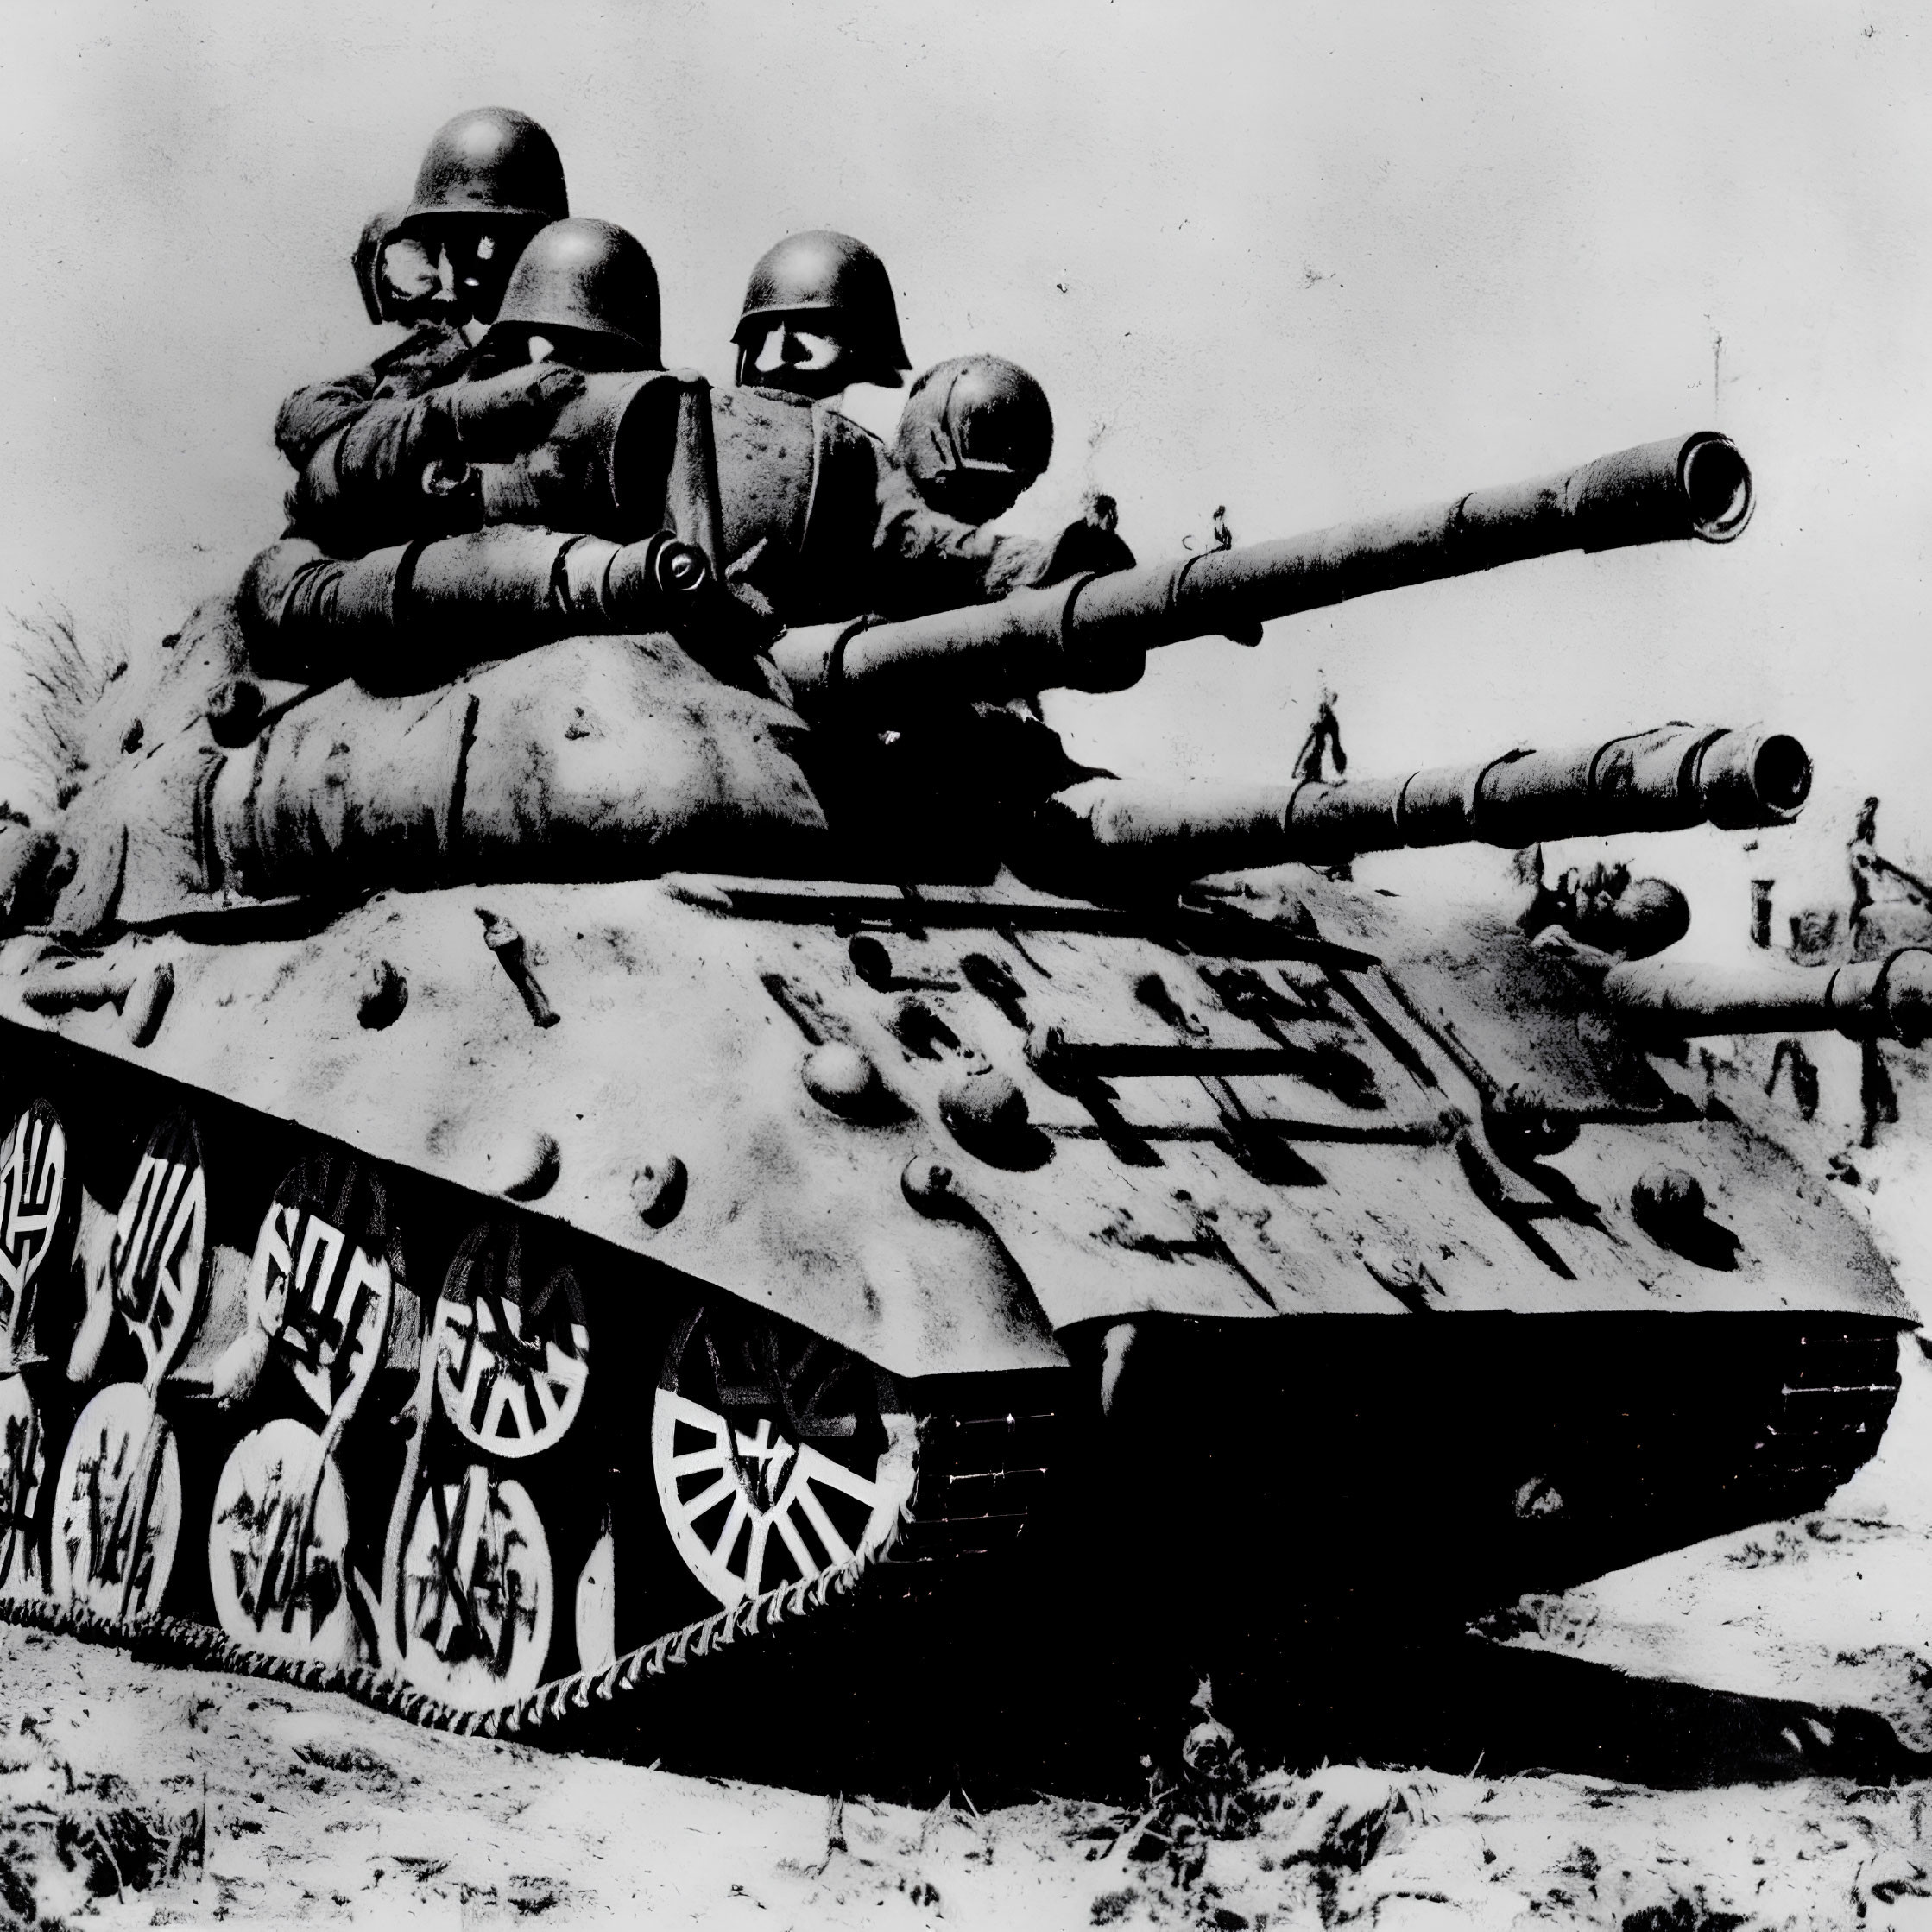 Black and white wartime photo of soldiers on camouflaged tank with guns